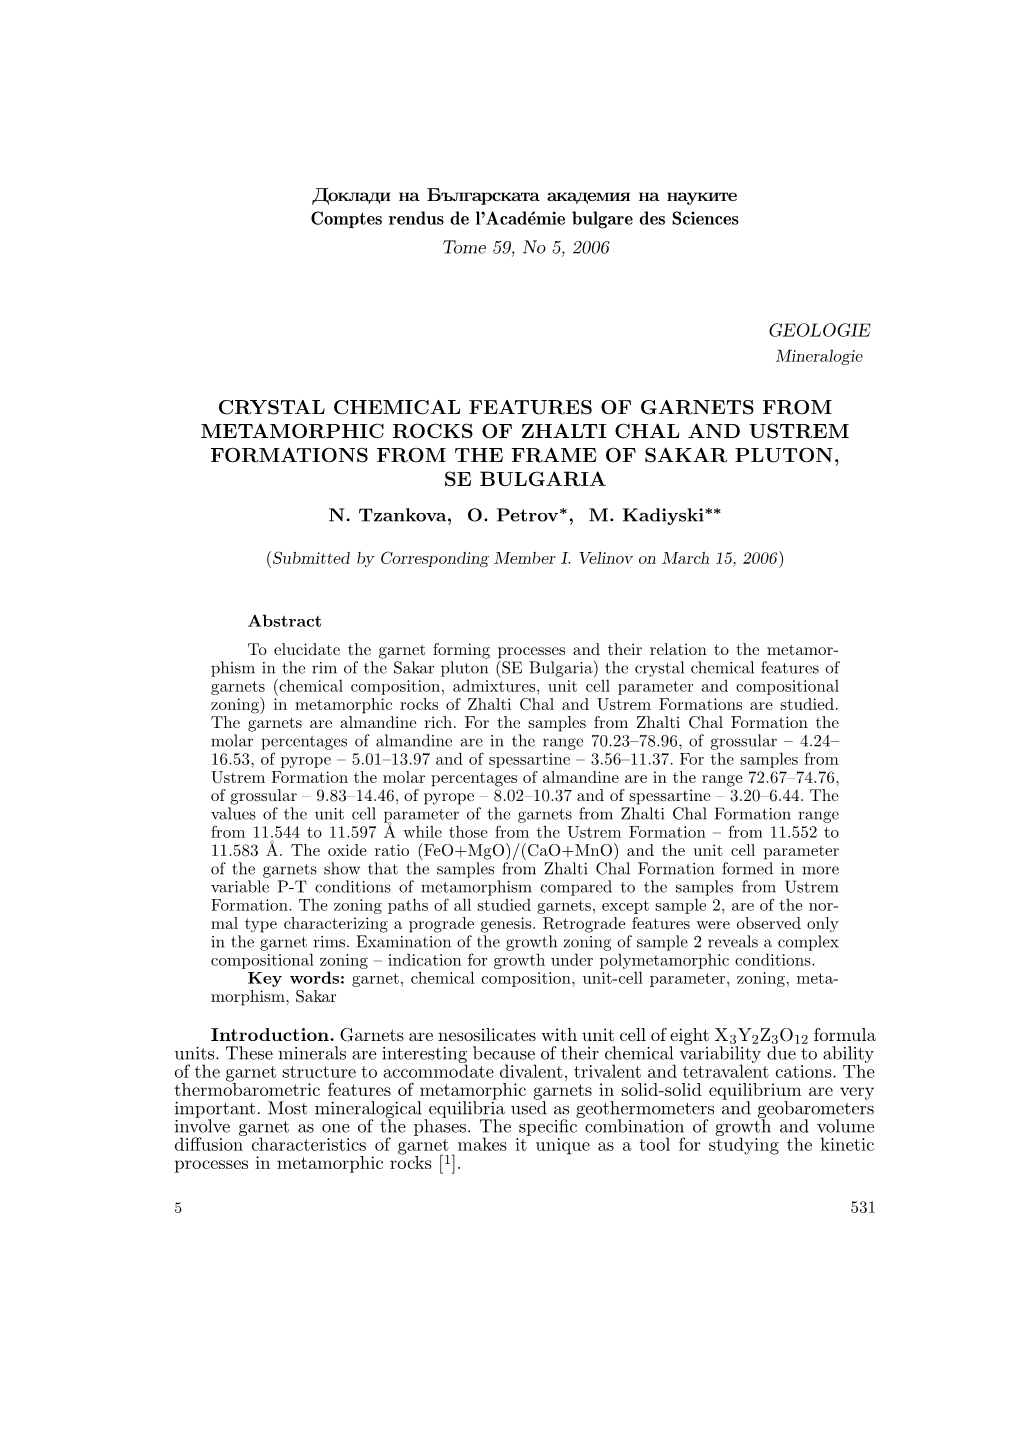 Crystal Chemical Features of Garnets from Metamorphic Rocks of Zhalti Chal and Ustrem Formations from the Frame of Sakar Pluton, Se Bulgaria N